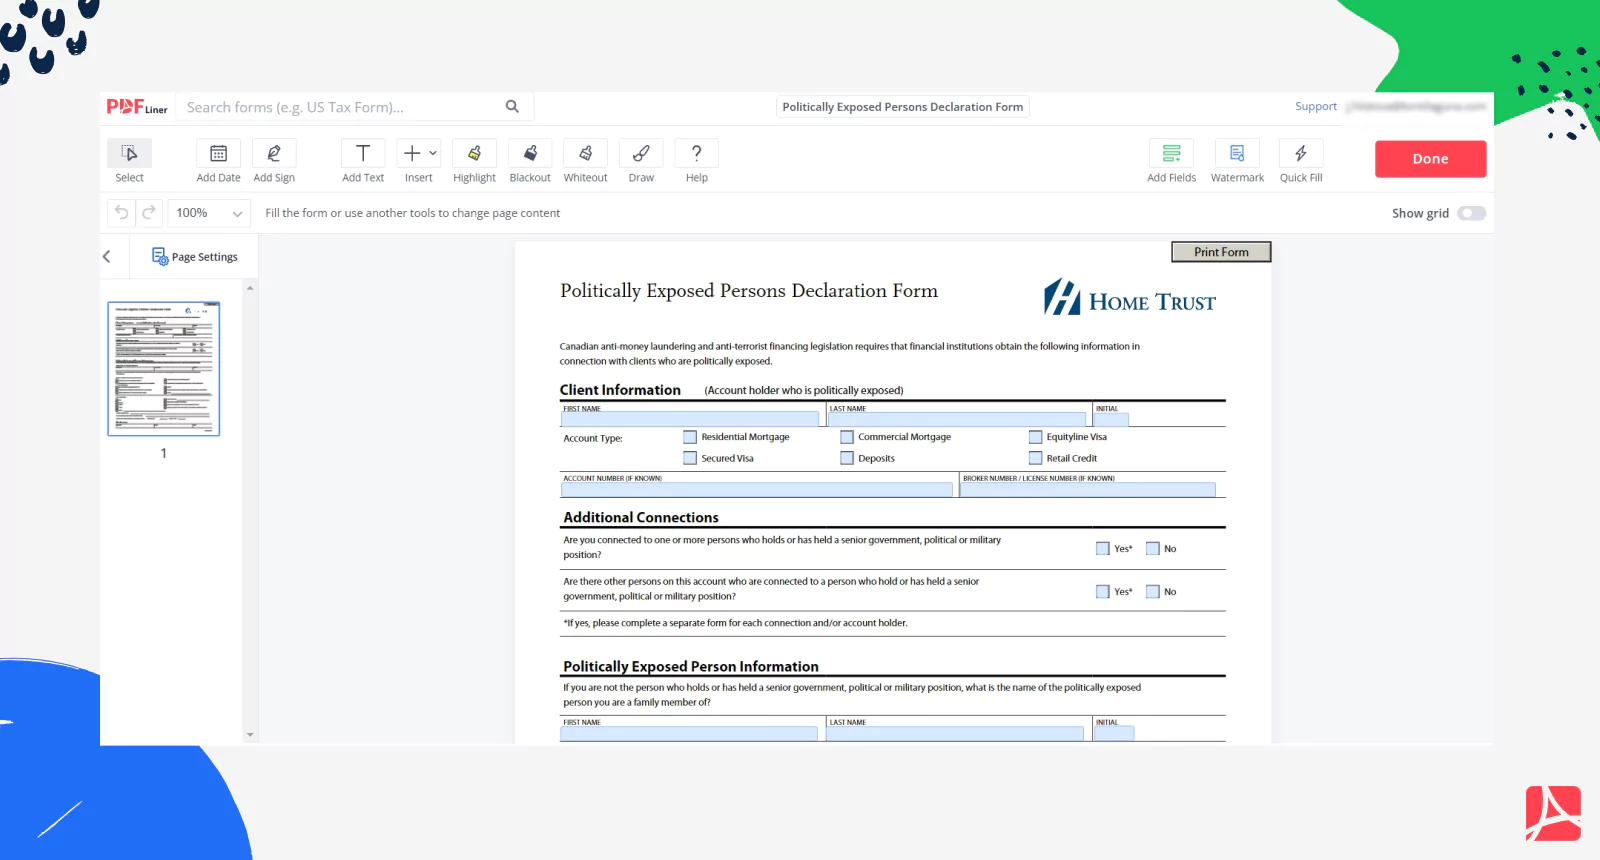 Politically Exposed Persons Declaration Form on PDFLiner